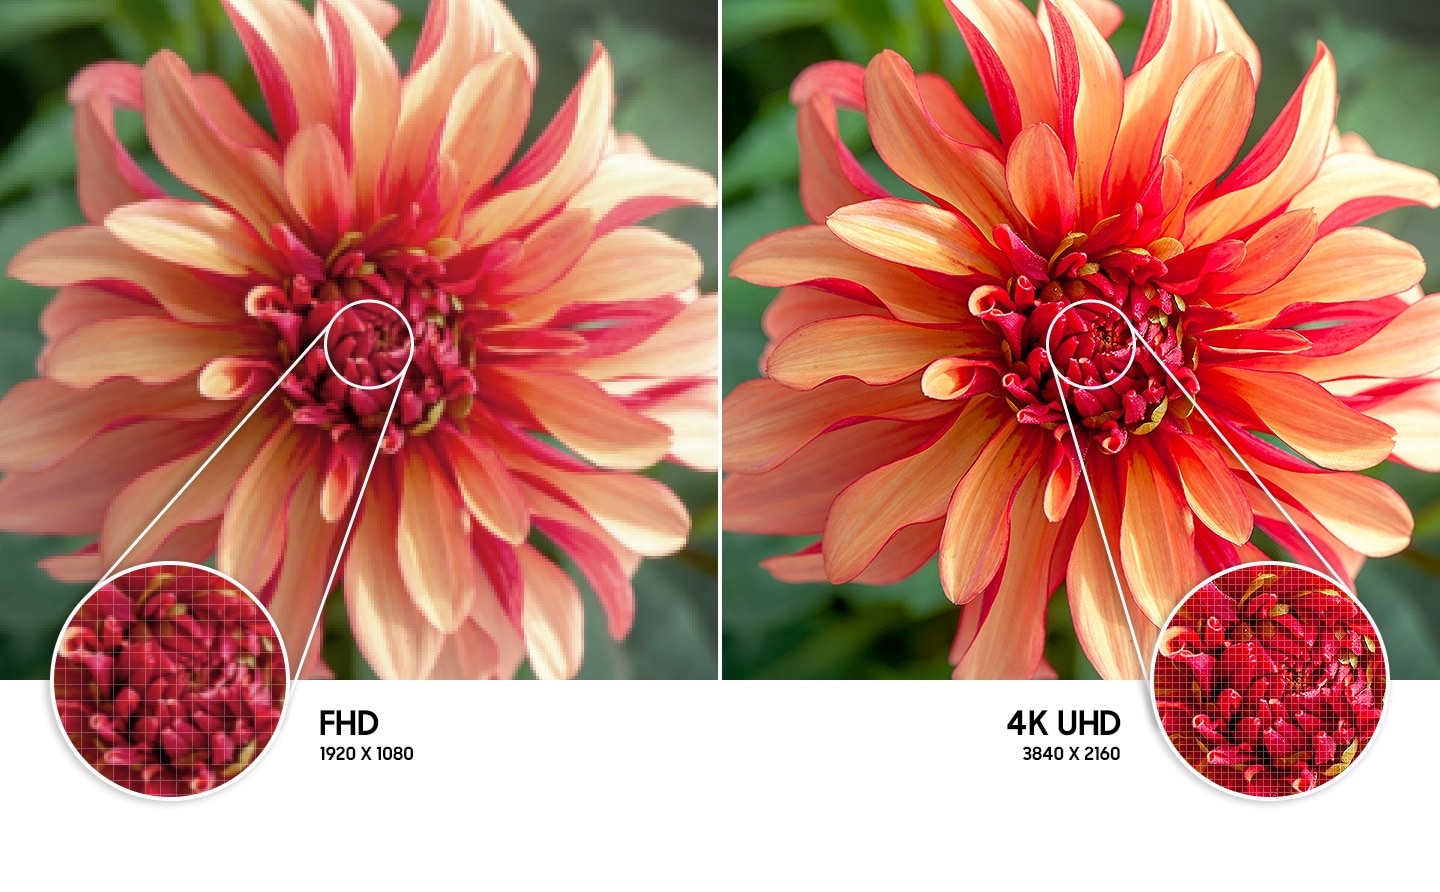 ph feature feel the reality of 4k uhd resolution 421645048?$FB TYPE A JPG$